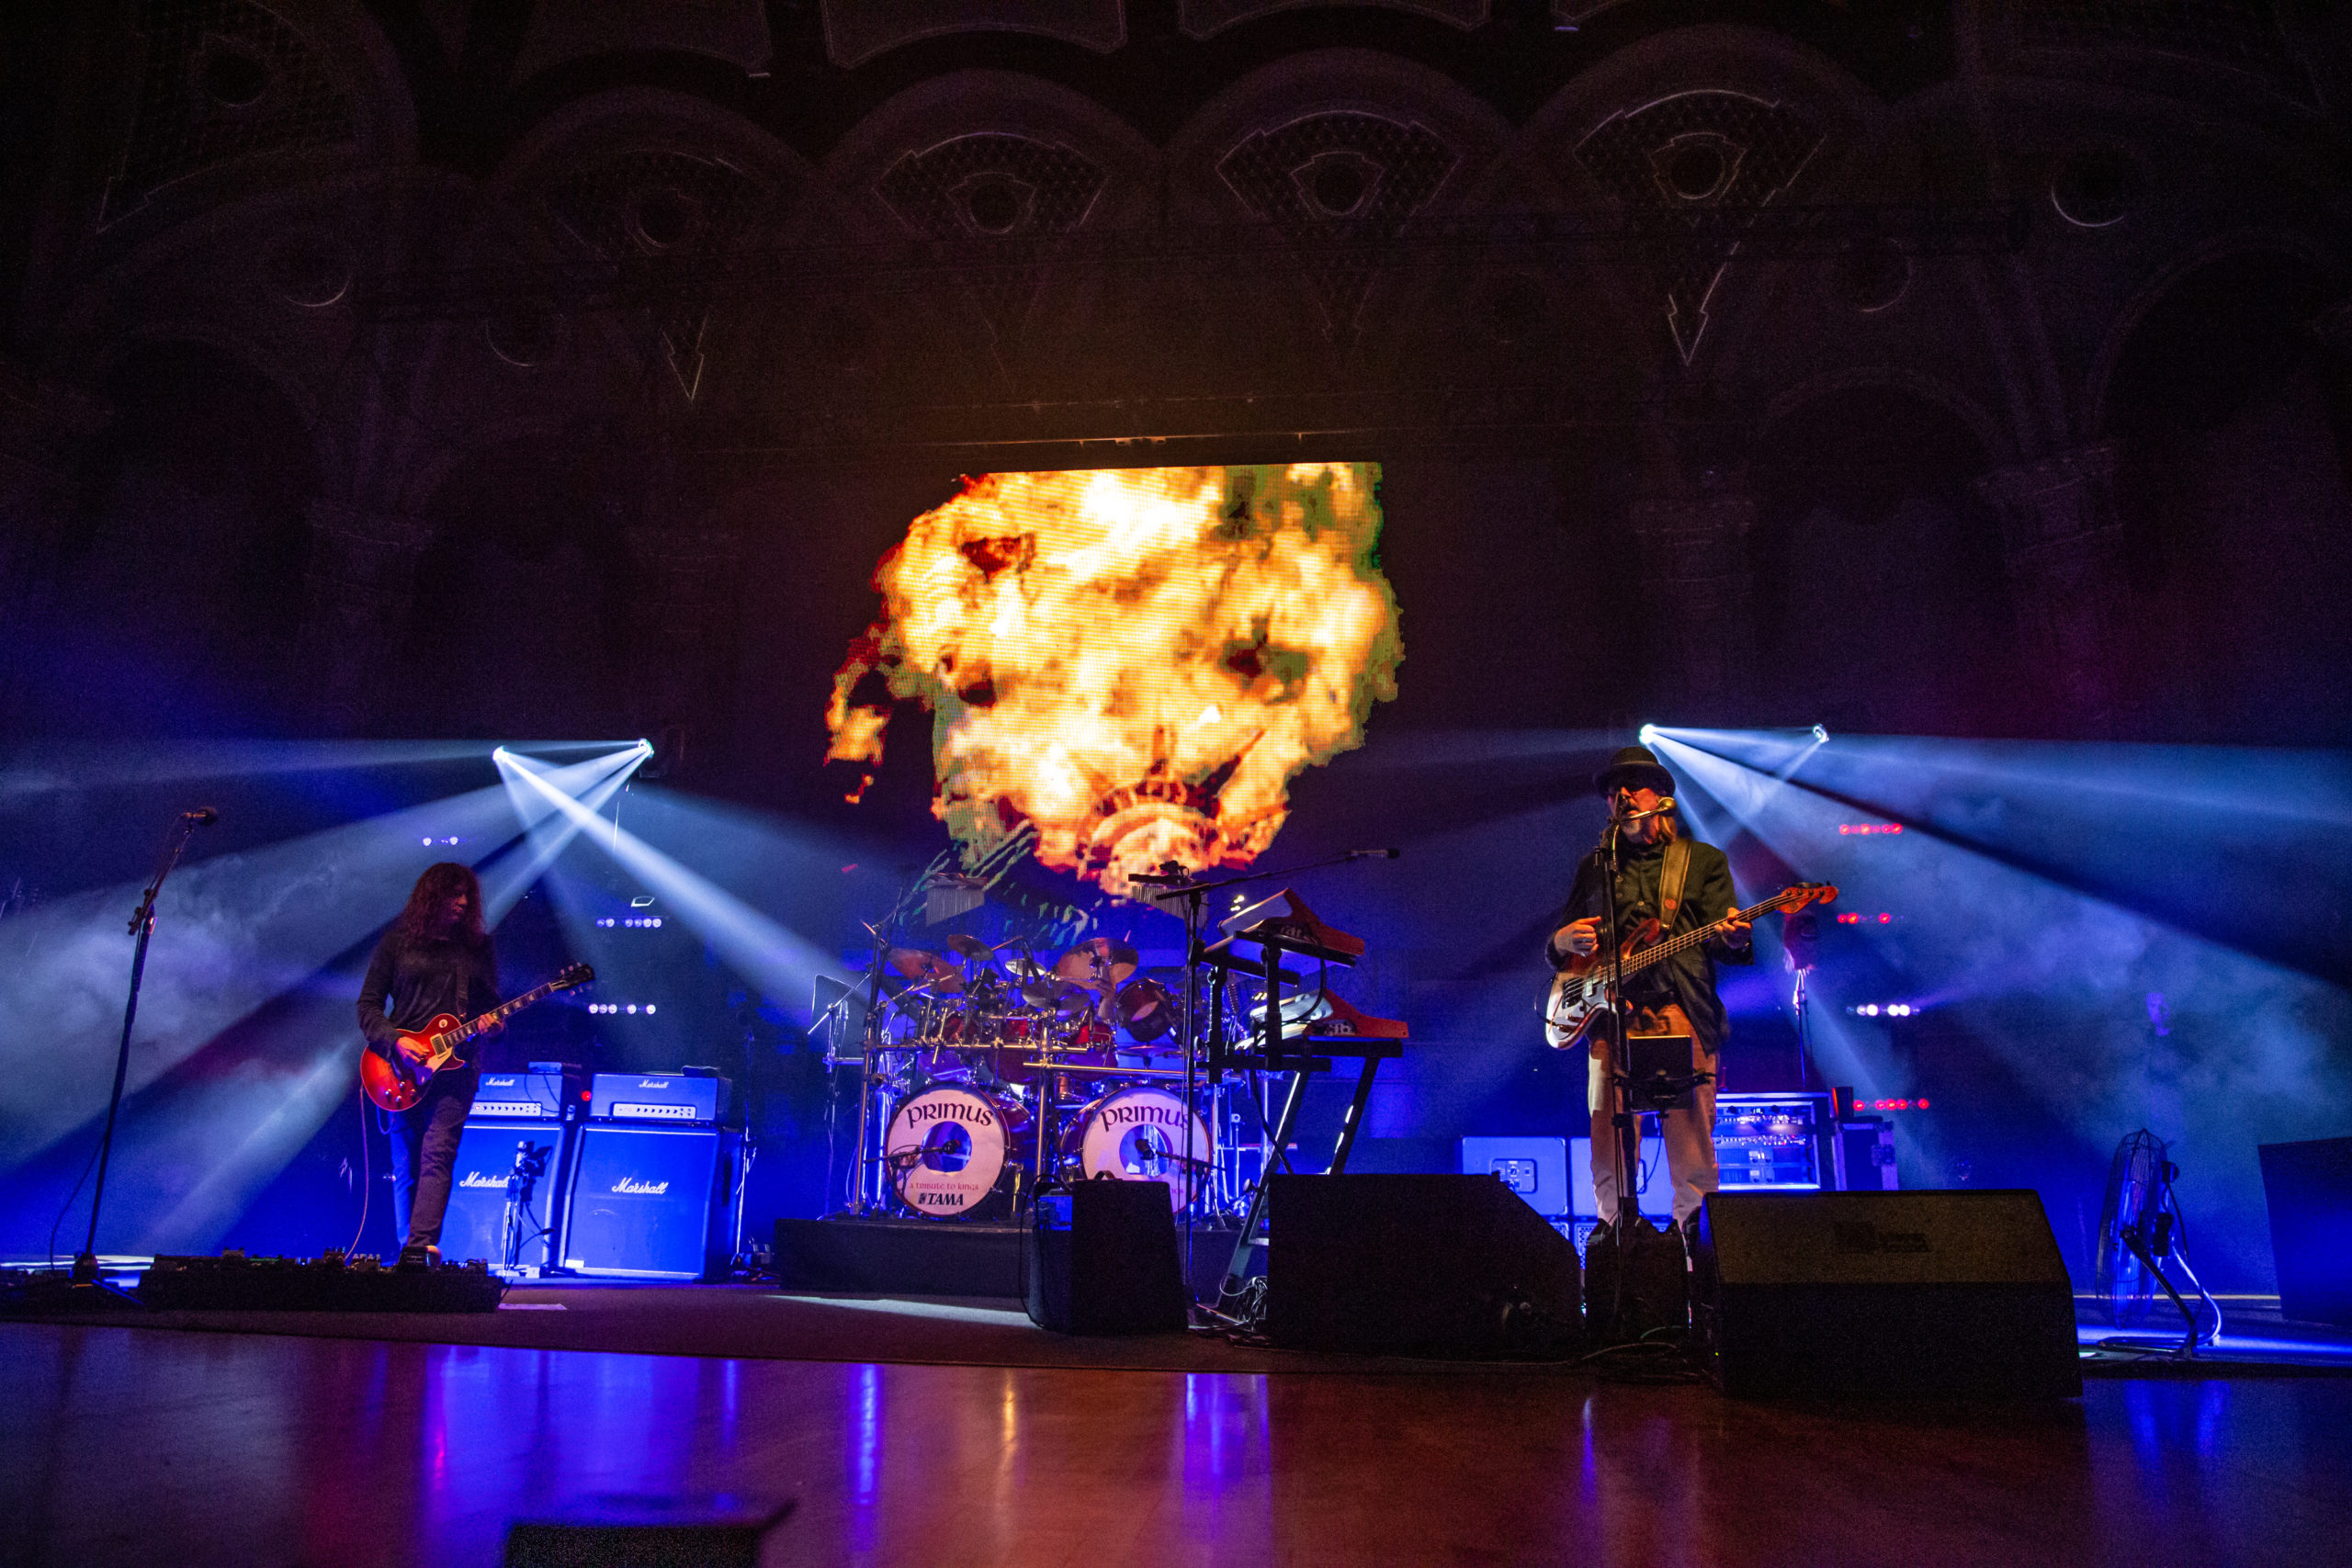 Explosions and the Statue of Liberty on screen during Primus' show at the Orpheum